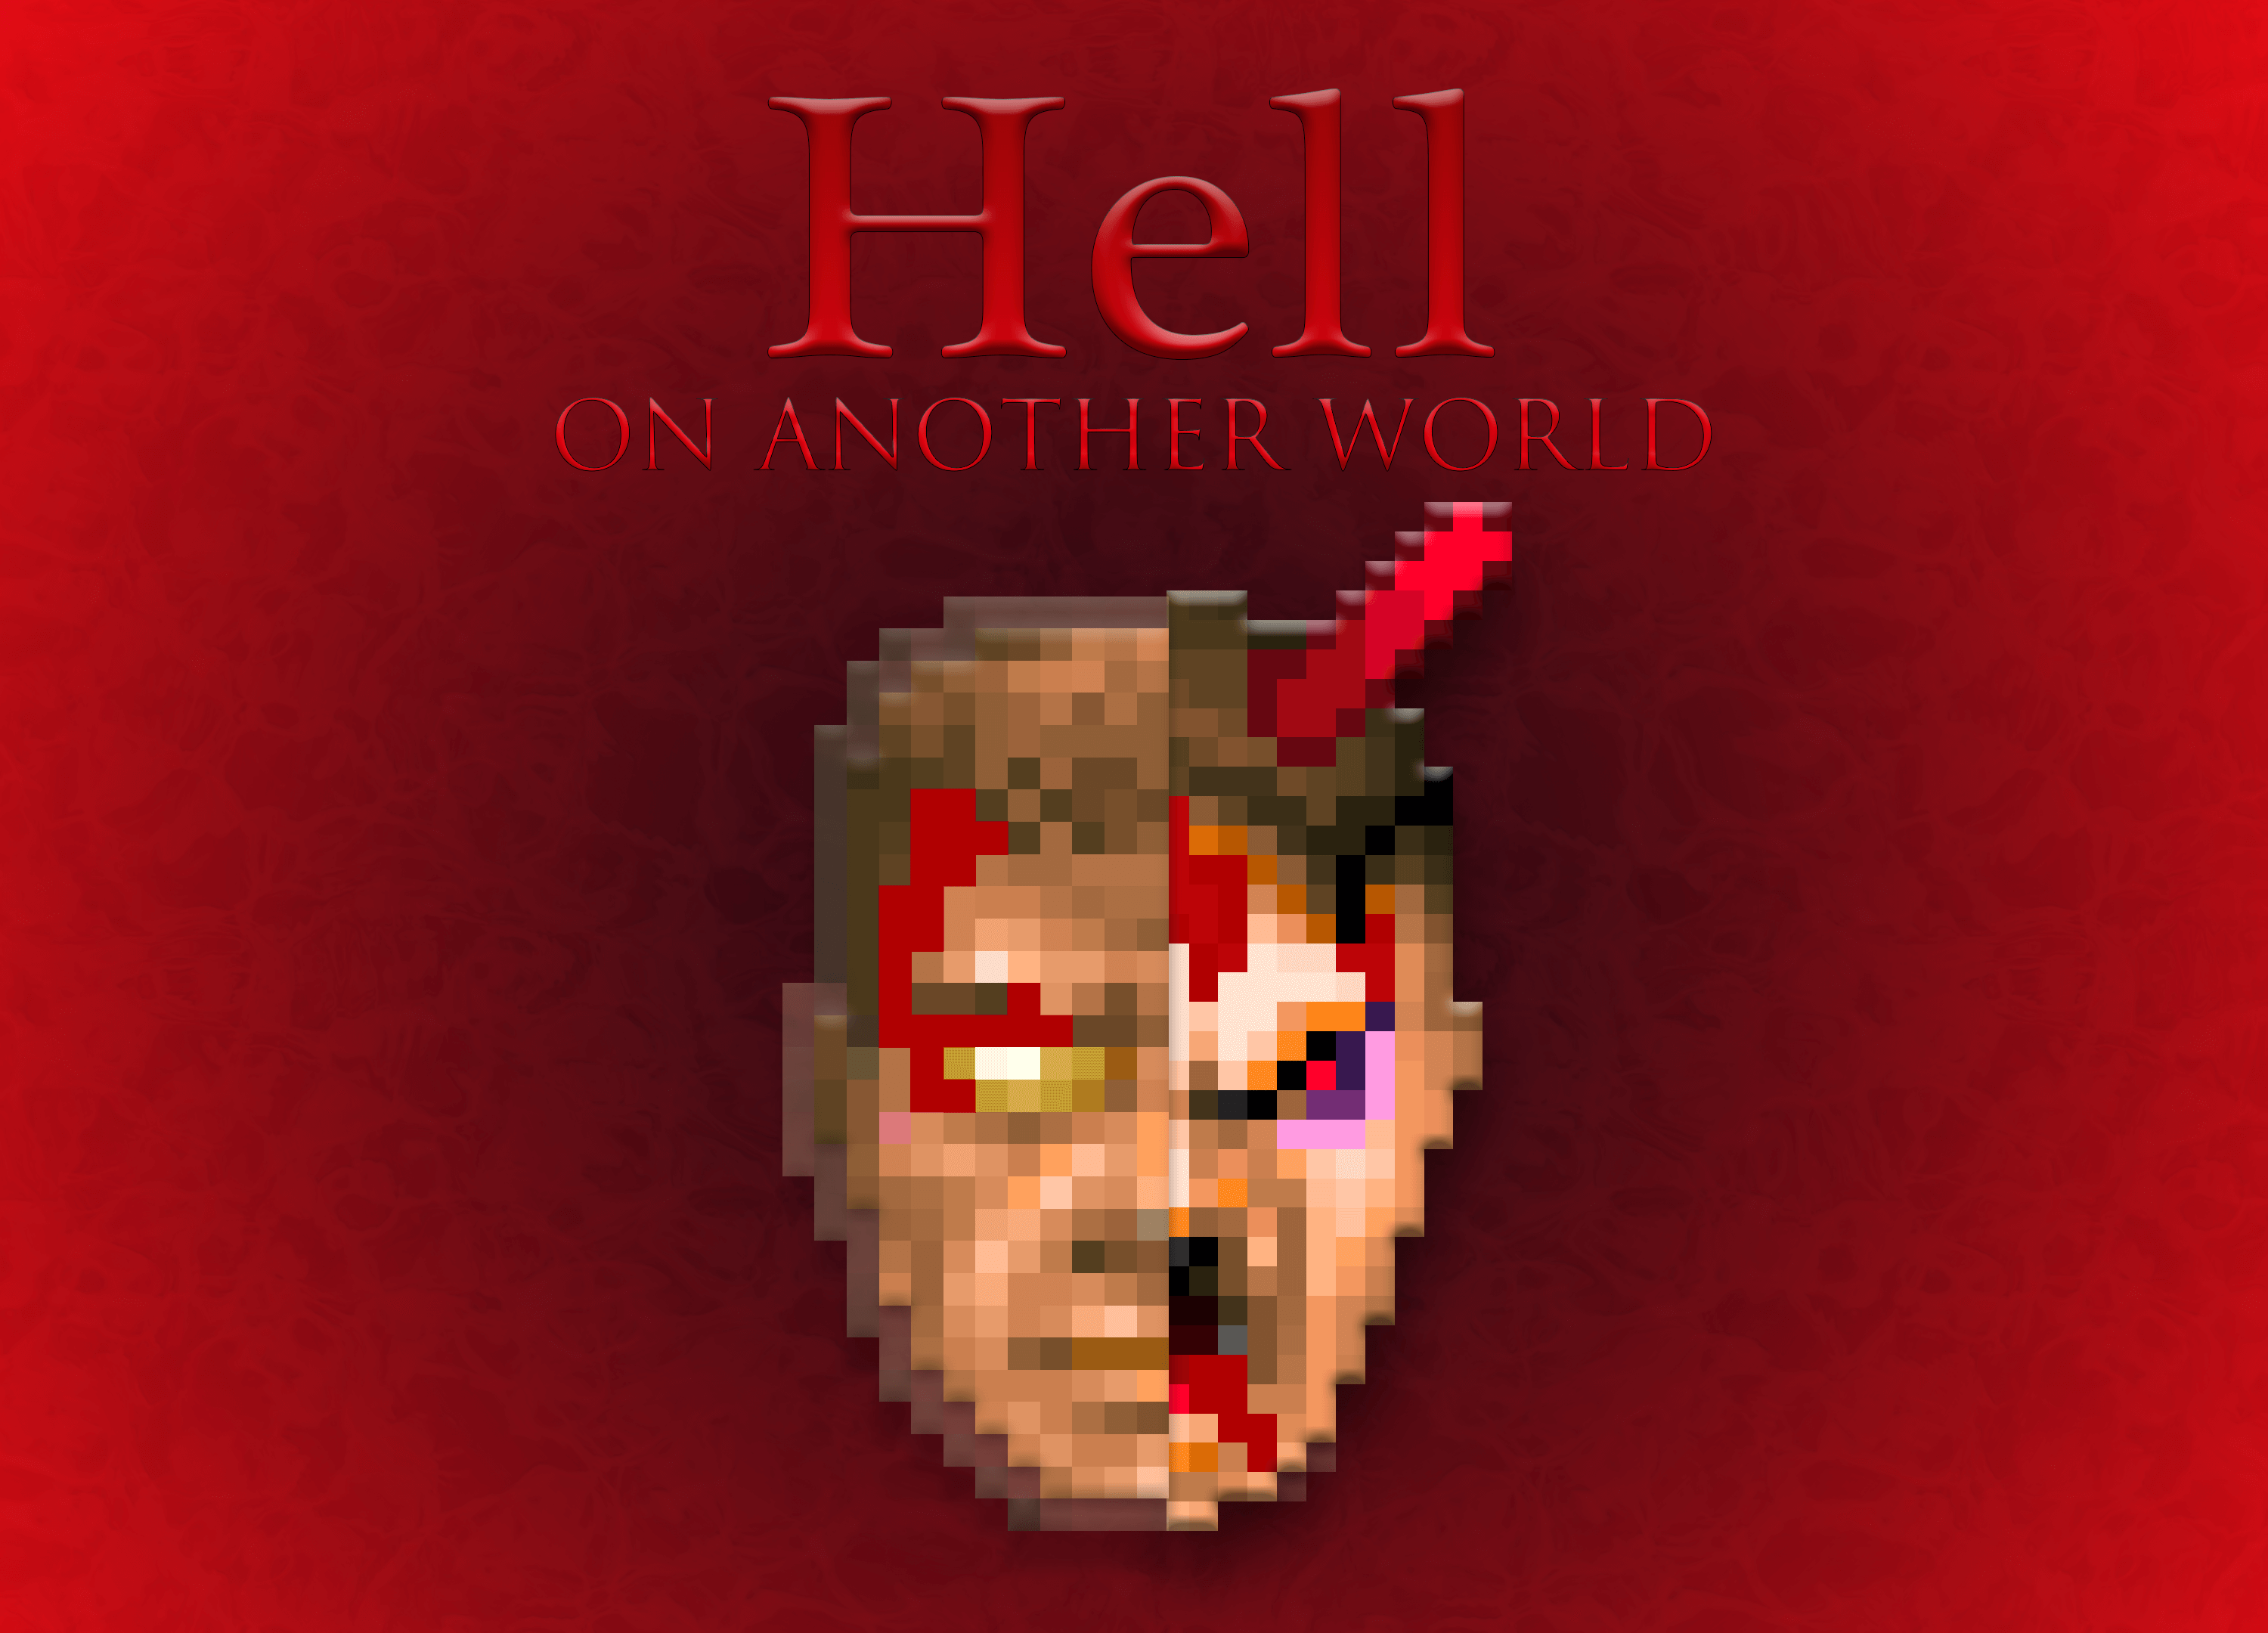 Hell : On another world